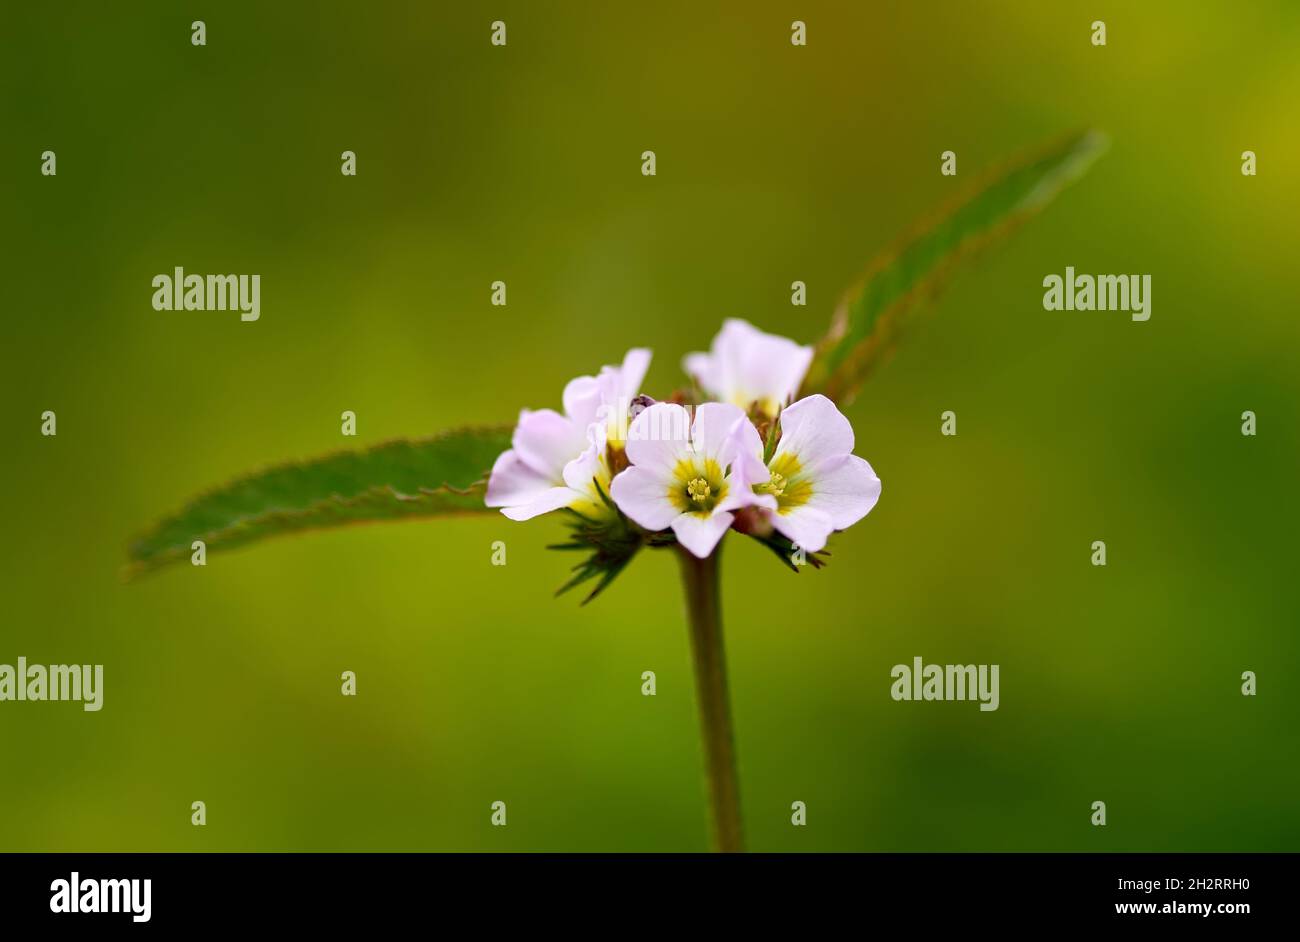 Tiny white flowers in bloom Stock Photo